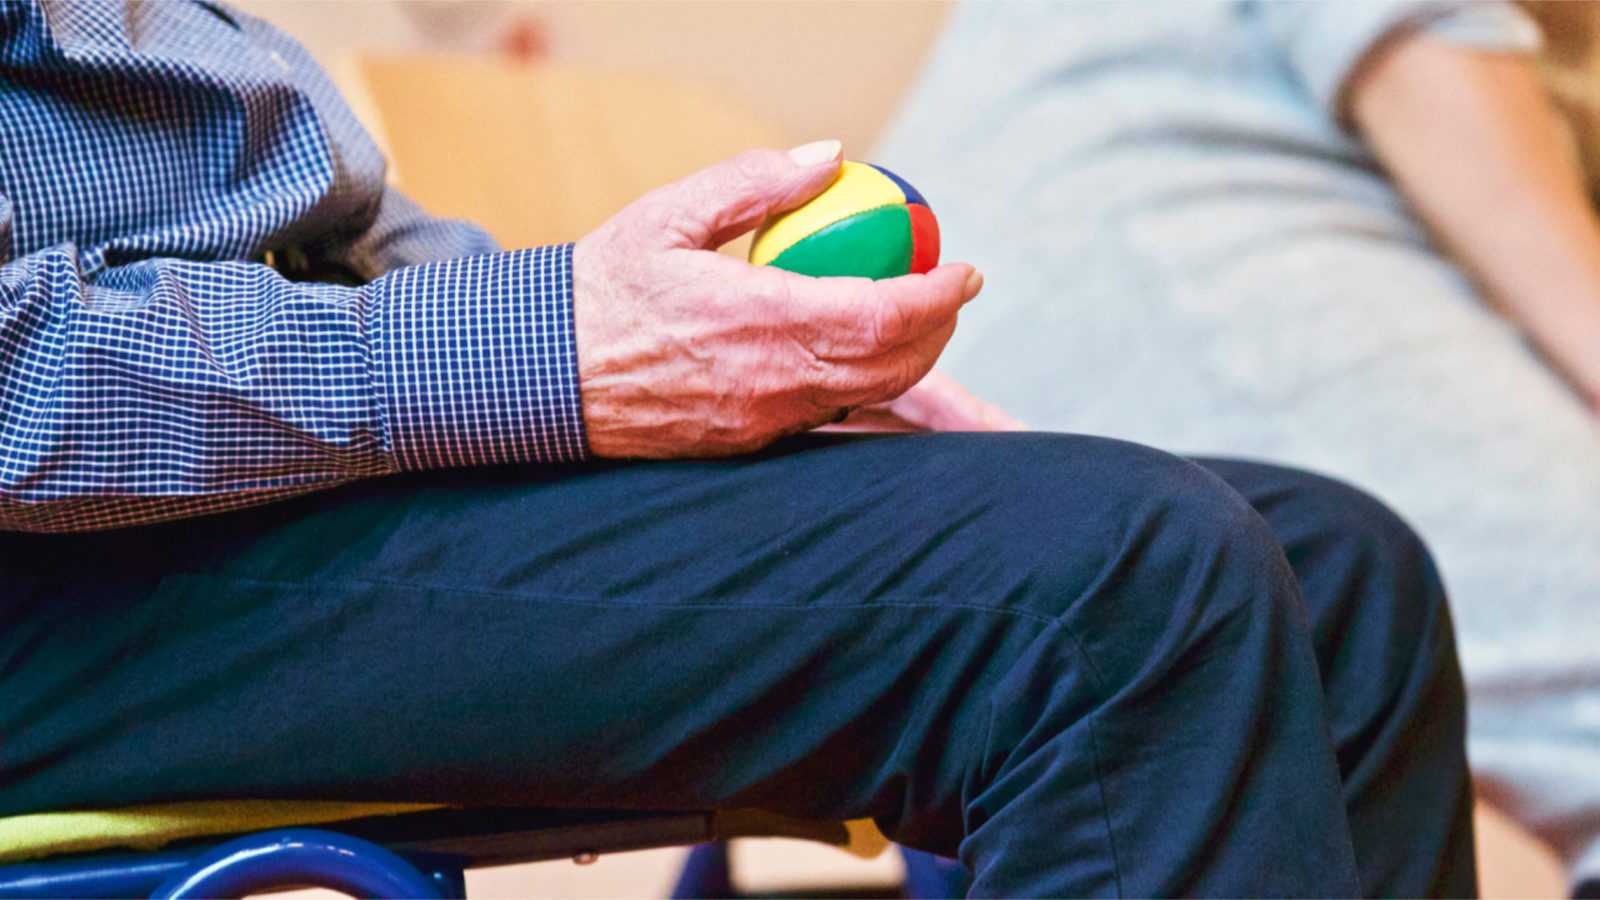 older person holding ball toy